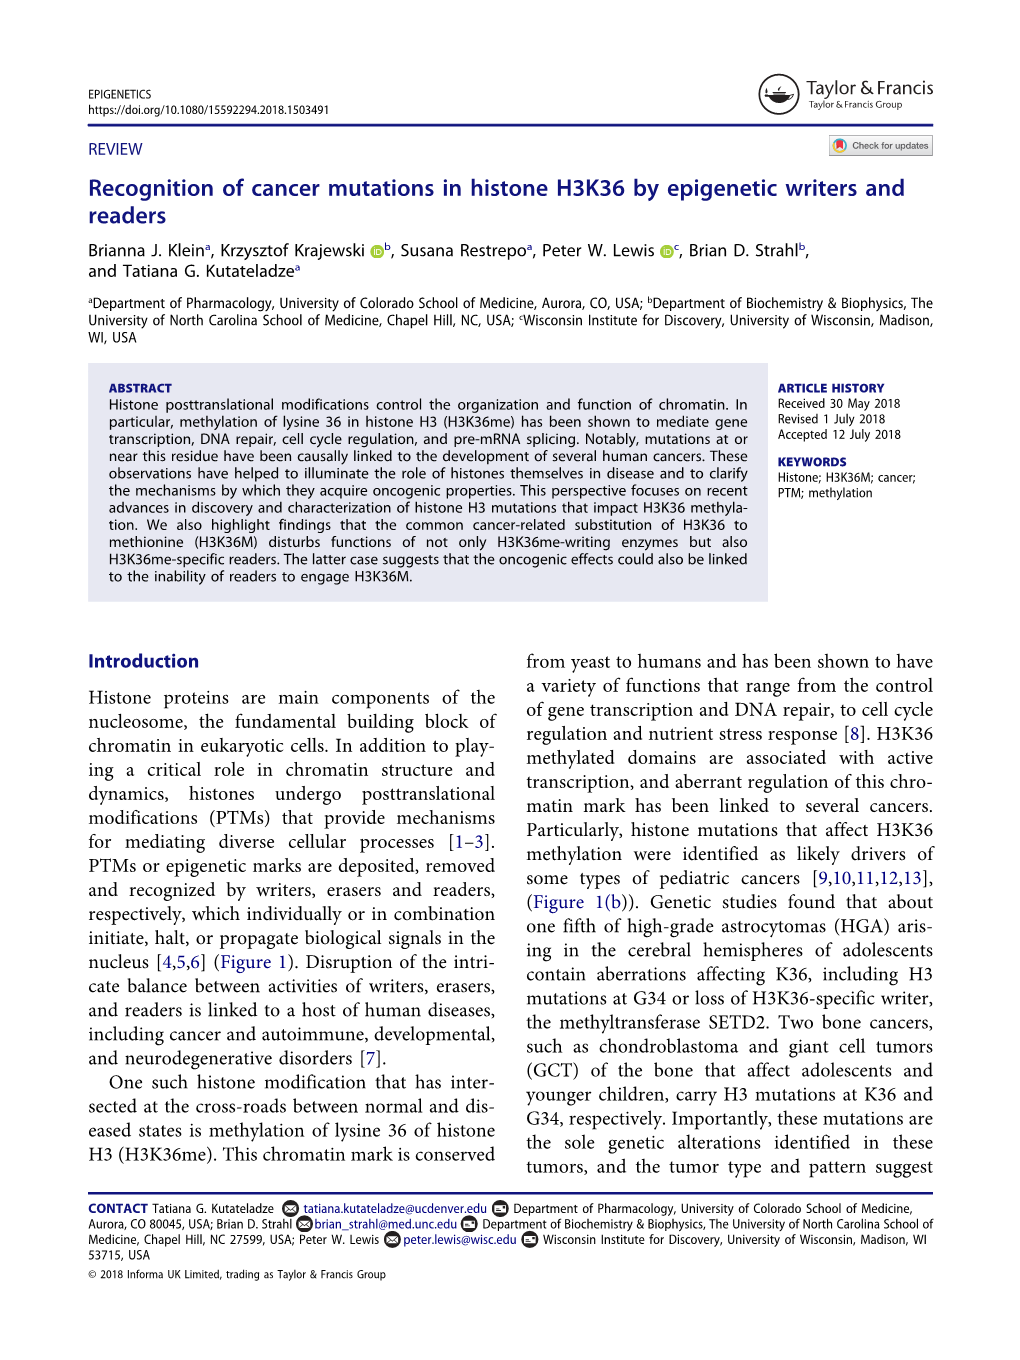 Recognition of Cancer Mutations in Histone H3K36 by Epigenetic Writers and Readers Brianna J